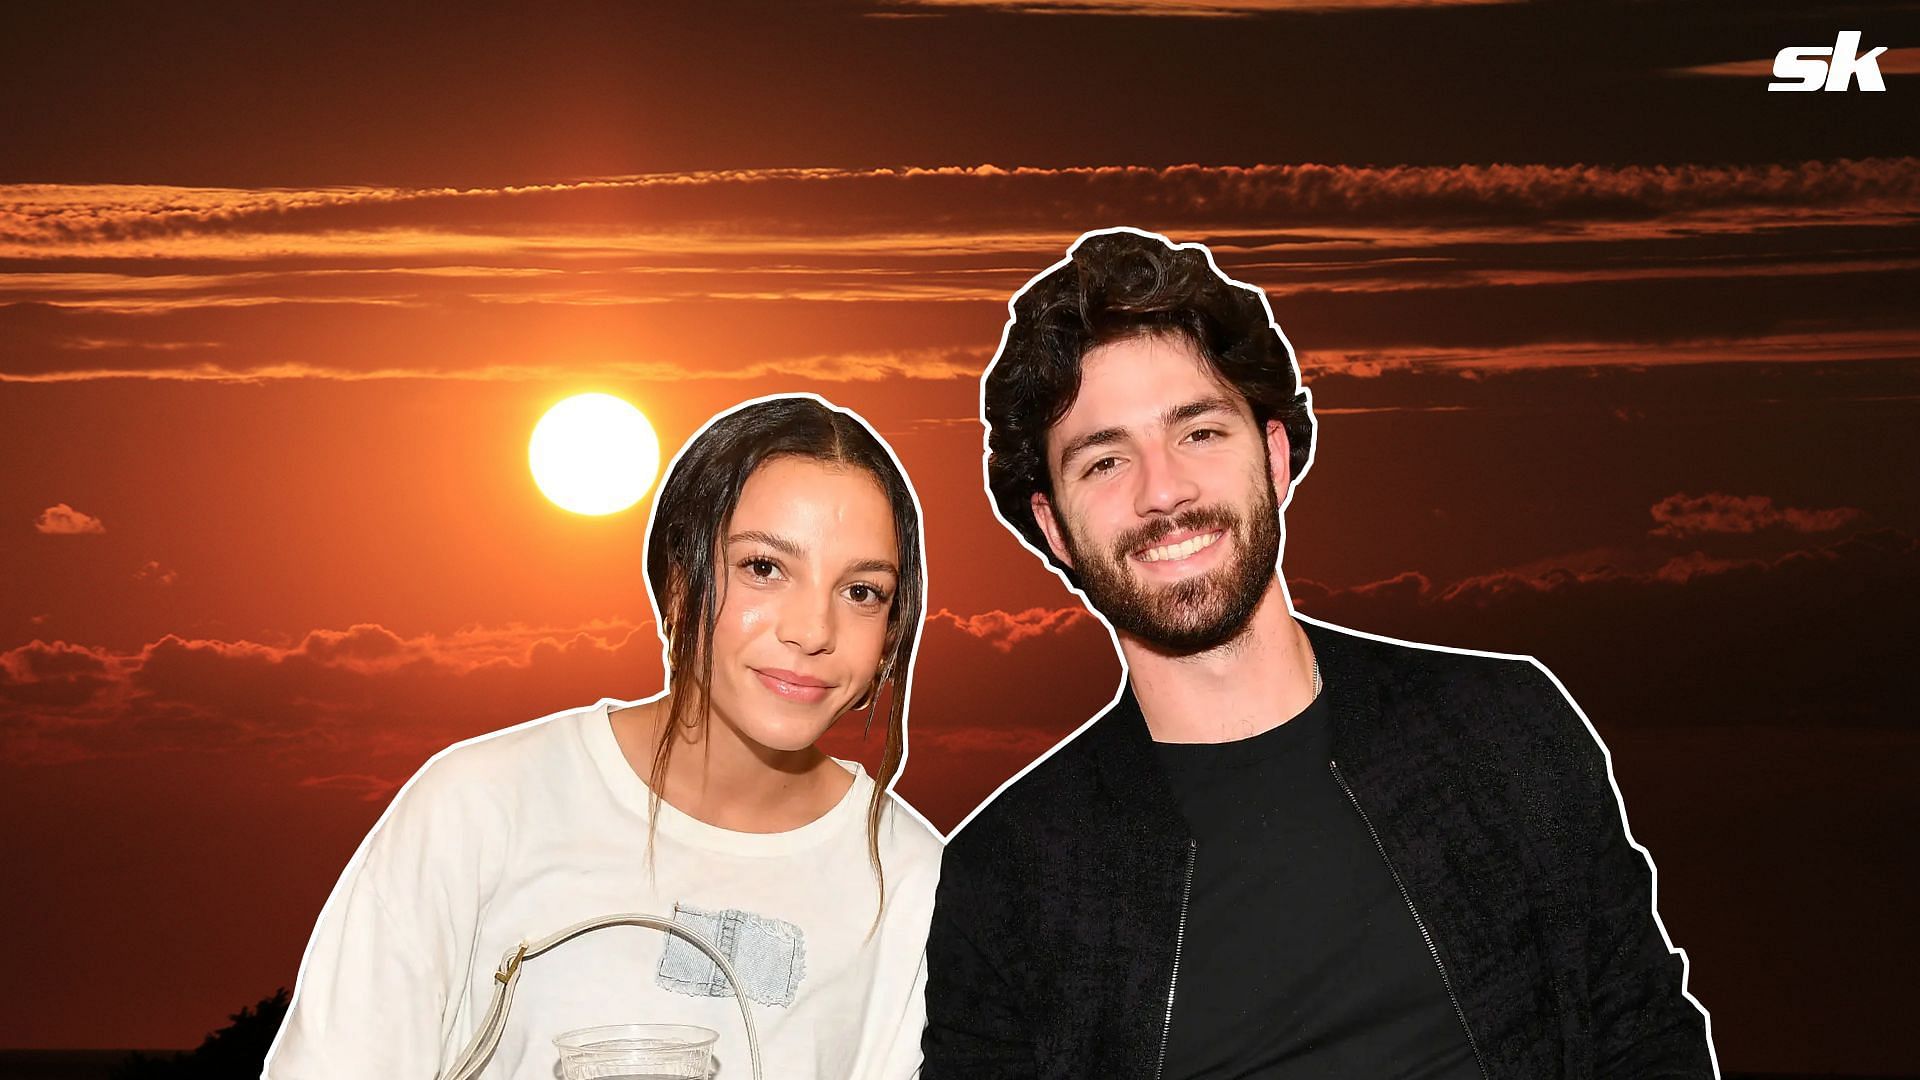 Mallory Pugh shows off wedding ring during coffee date with husband Dansby Swanson